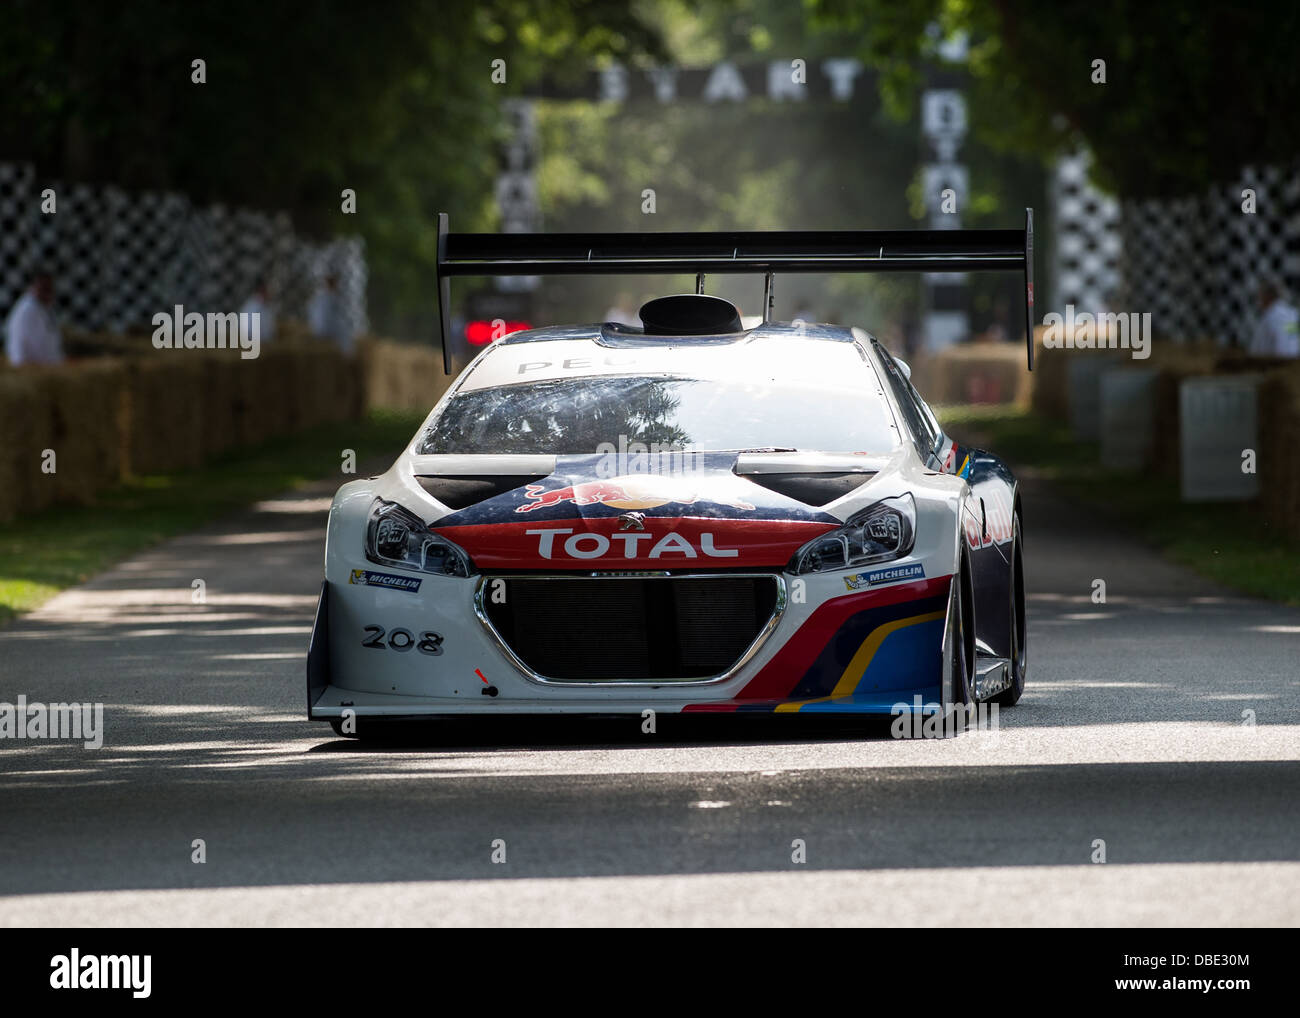 Chichester, UK - July 2013: Peugeot 208 T16 in action at the Goodwood Festival of Speed on July 13, 2013. Stock Photo